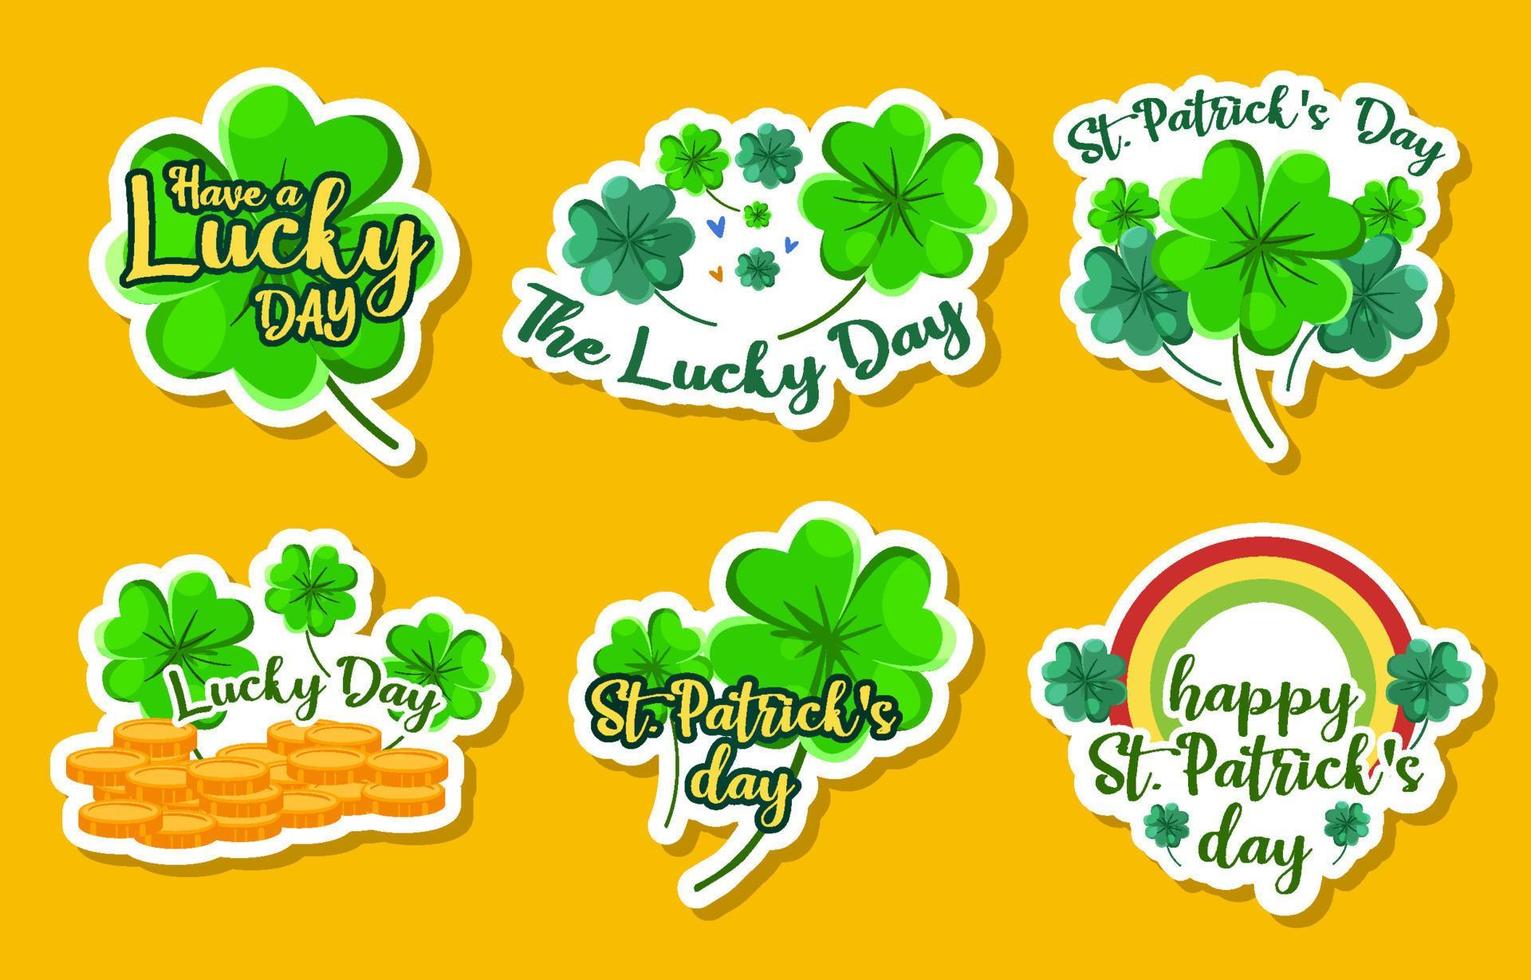 Happy St Patrick's Day Decal